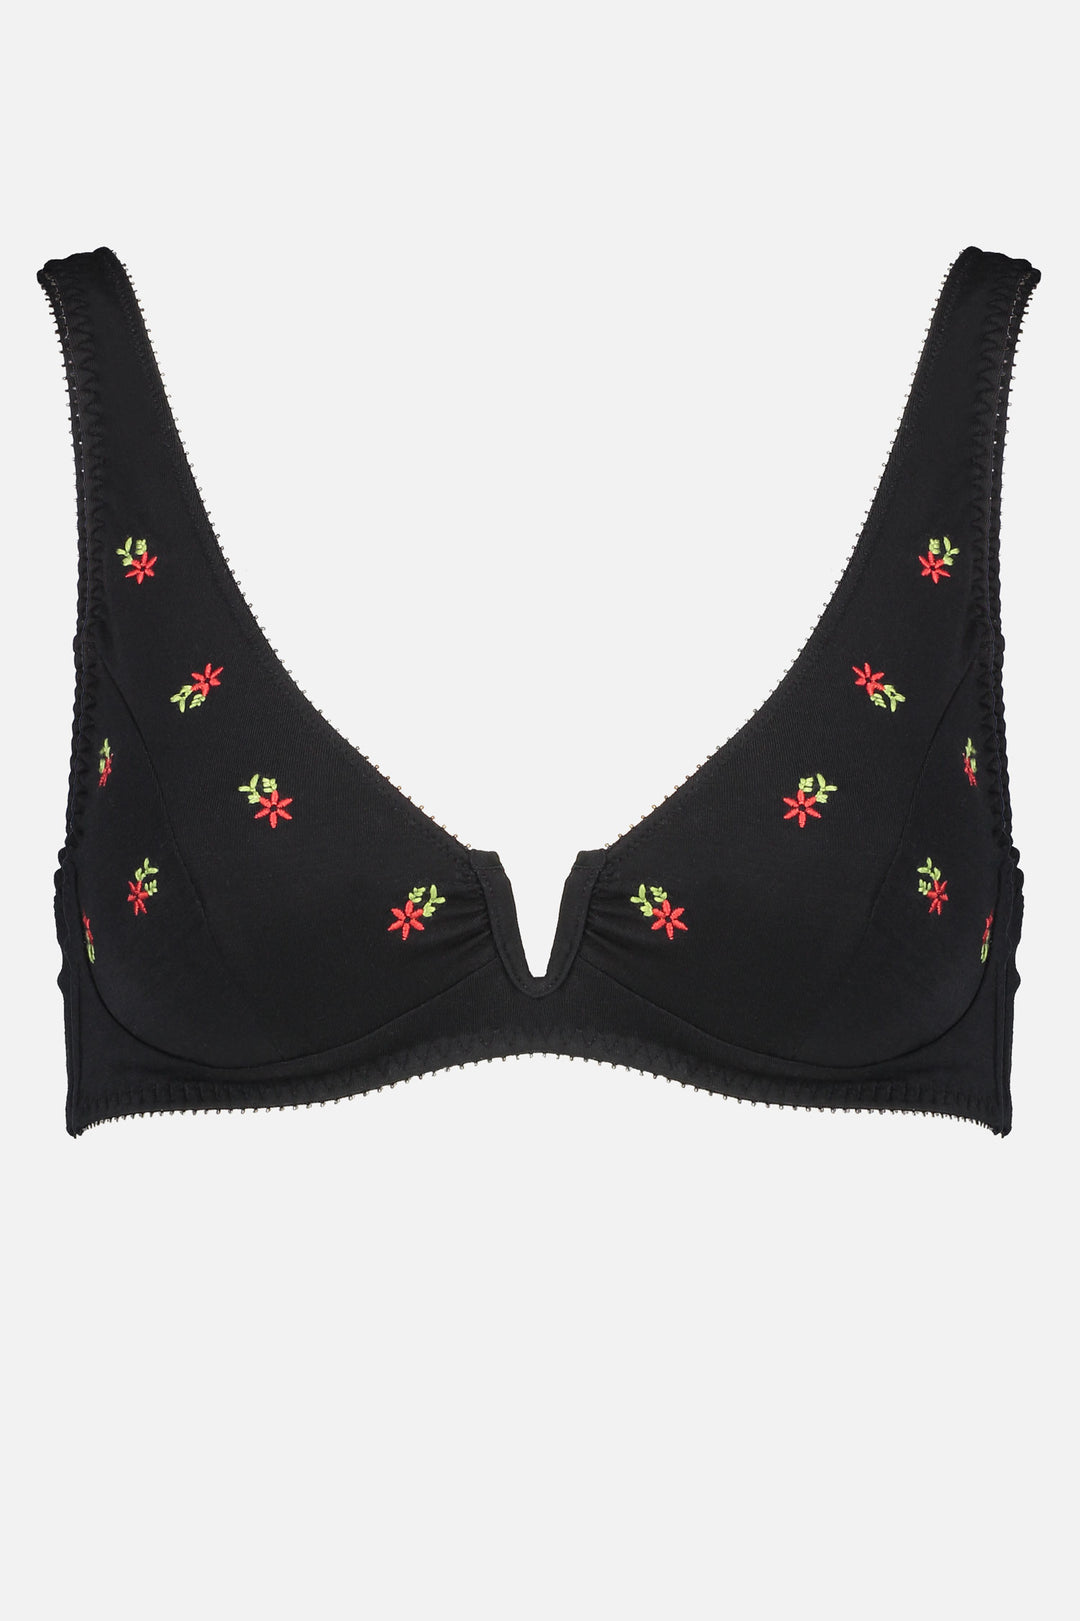 Videris Lingerie Sarah underwire free soft cup bra in black embroidered TENCEL™ with a scooped plunge cup and front U wire